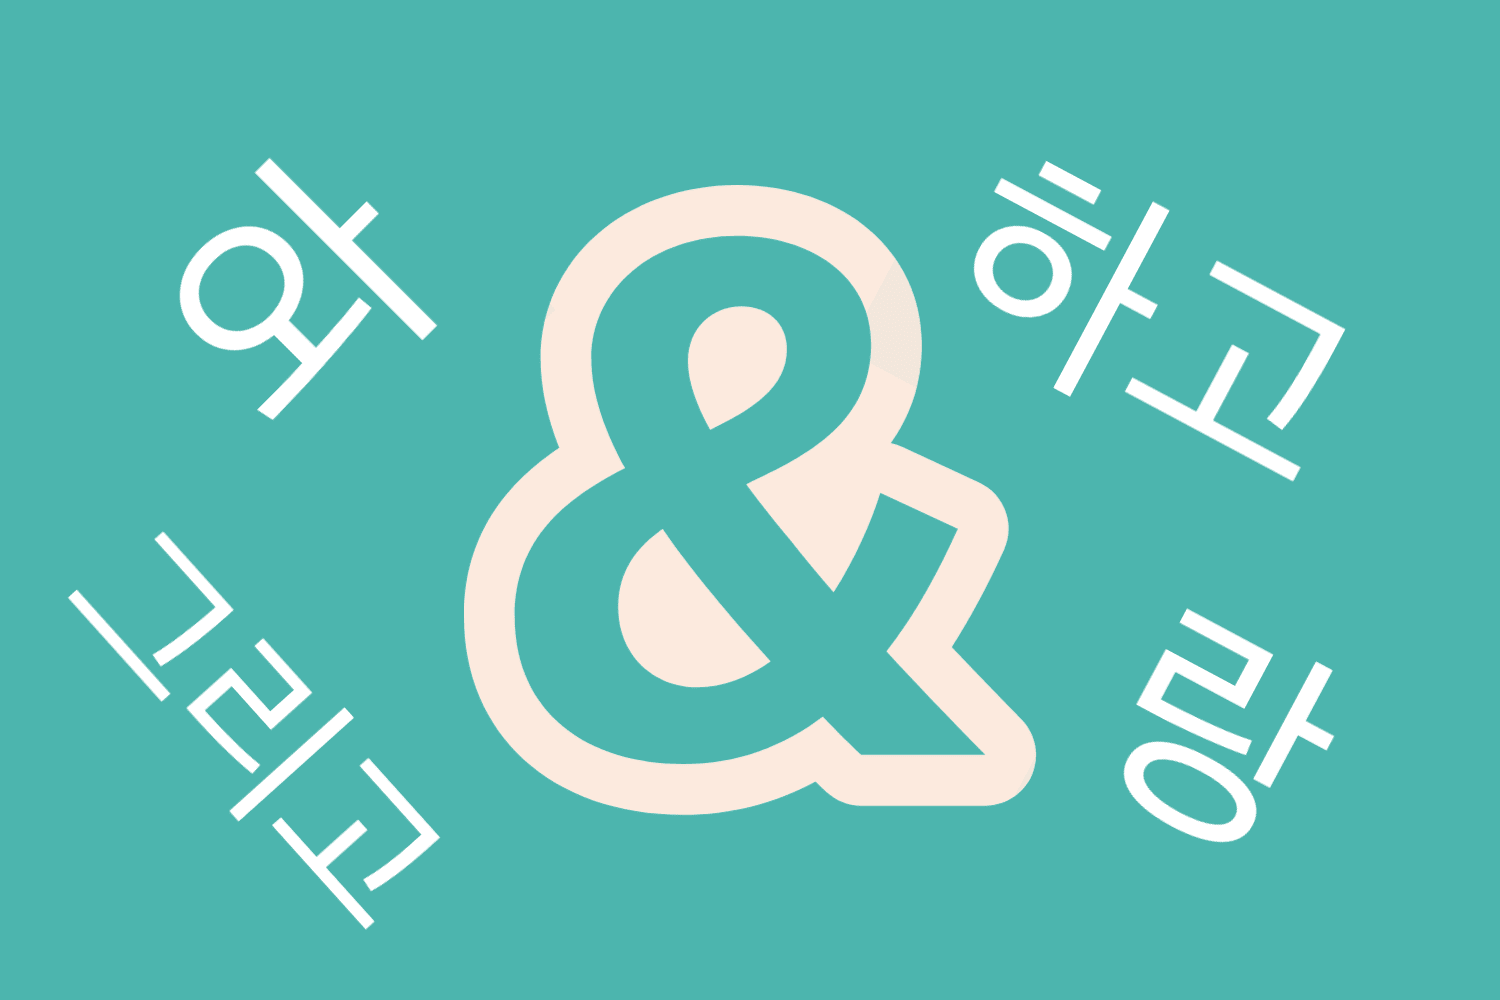 how to say come here in korean